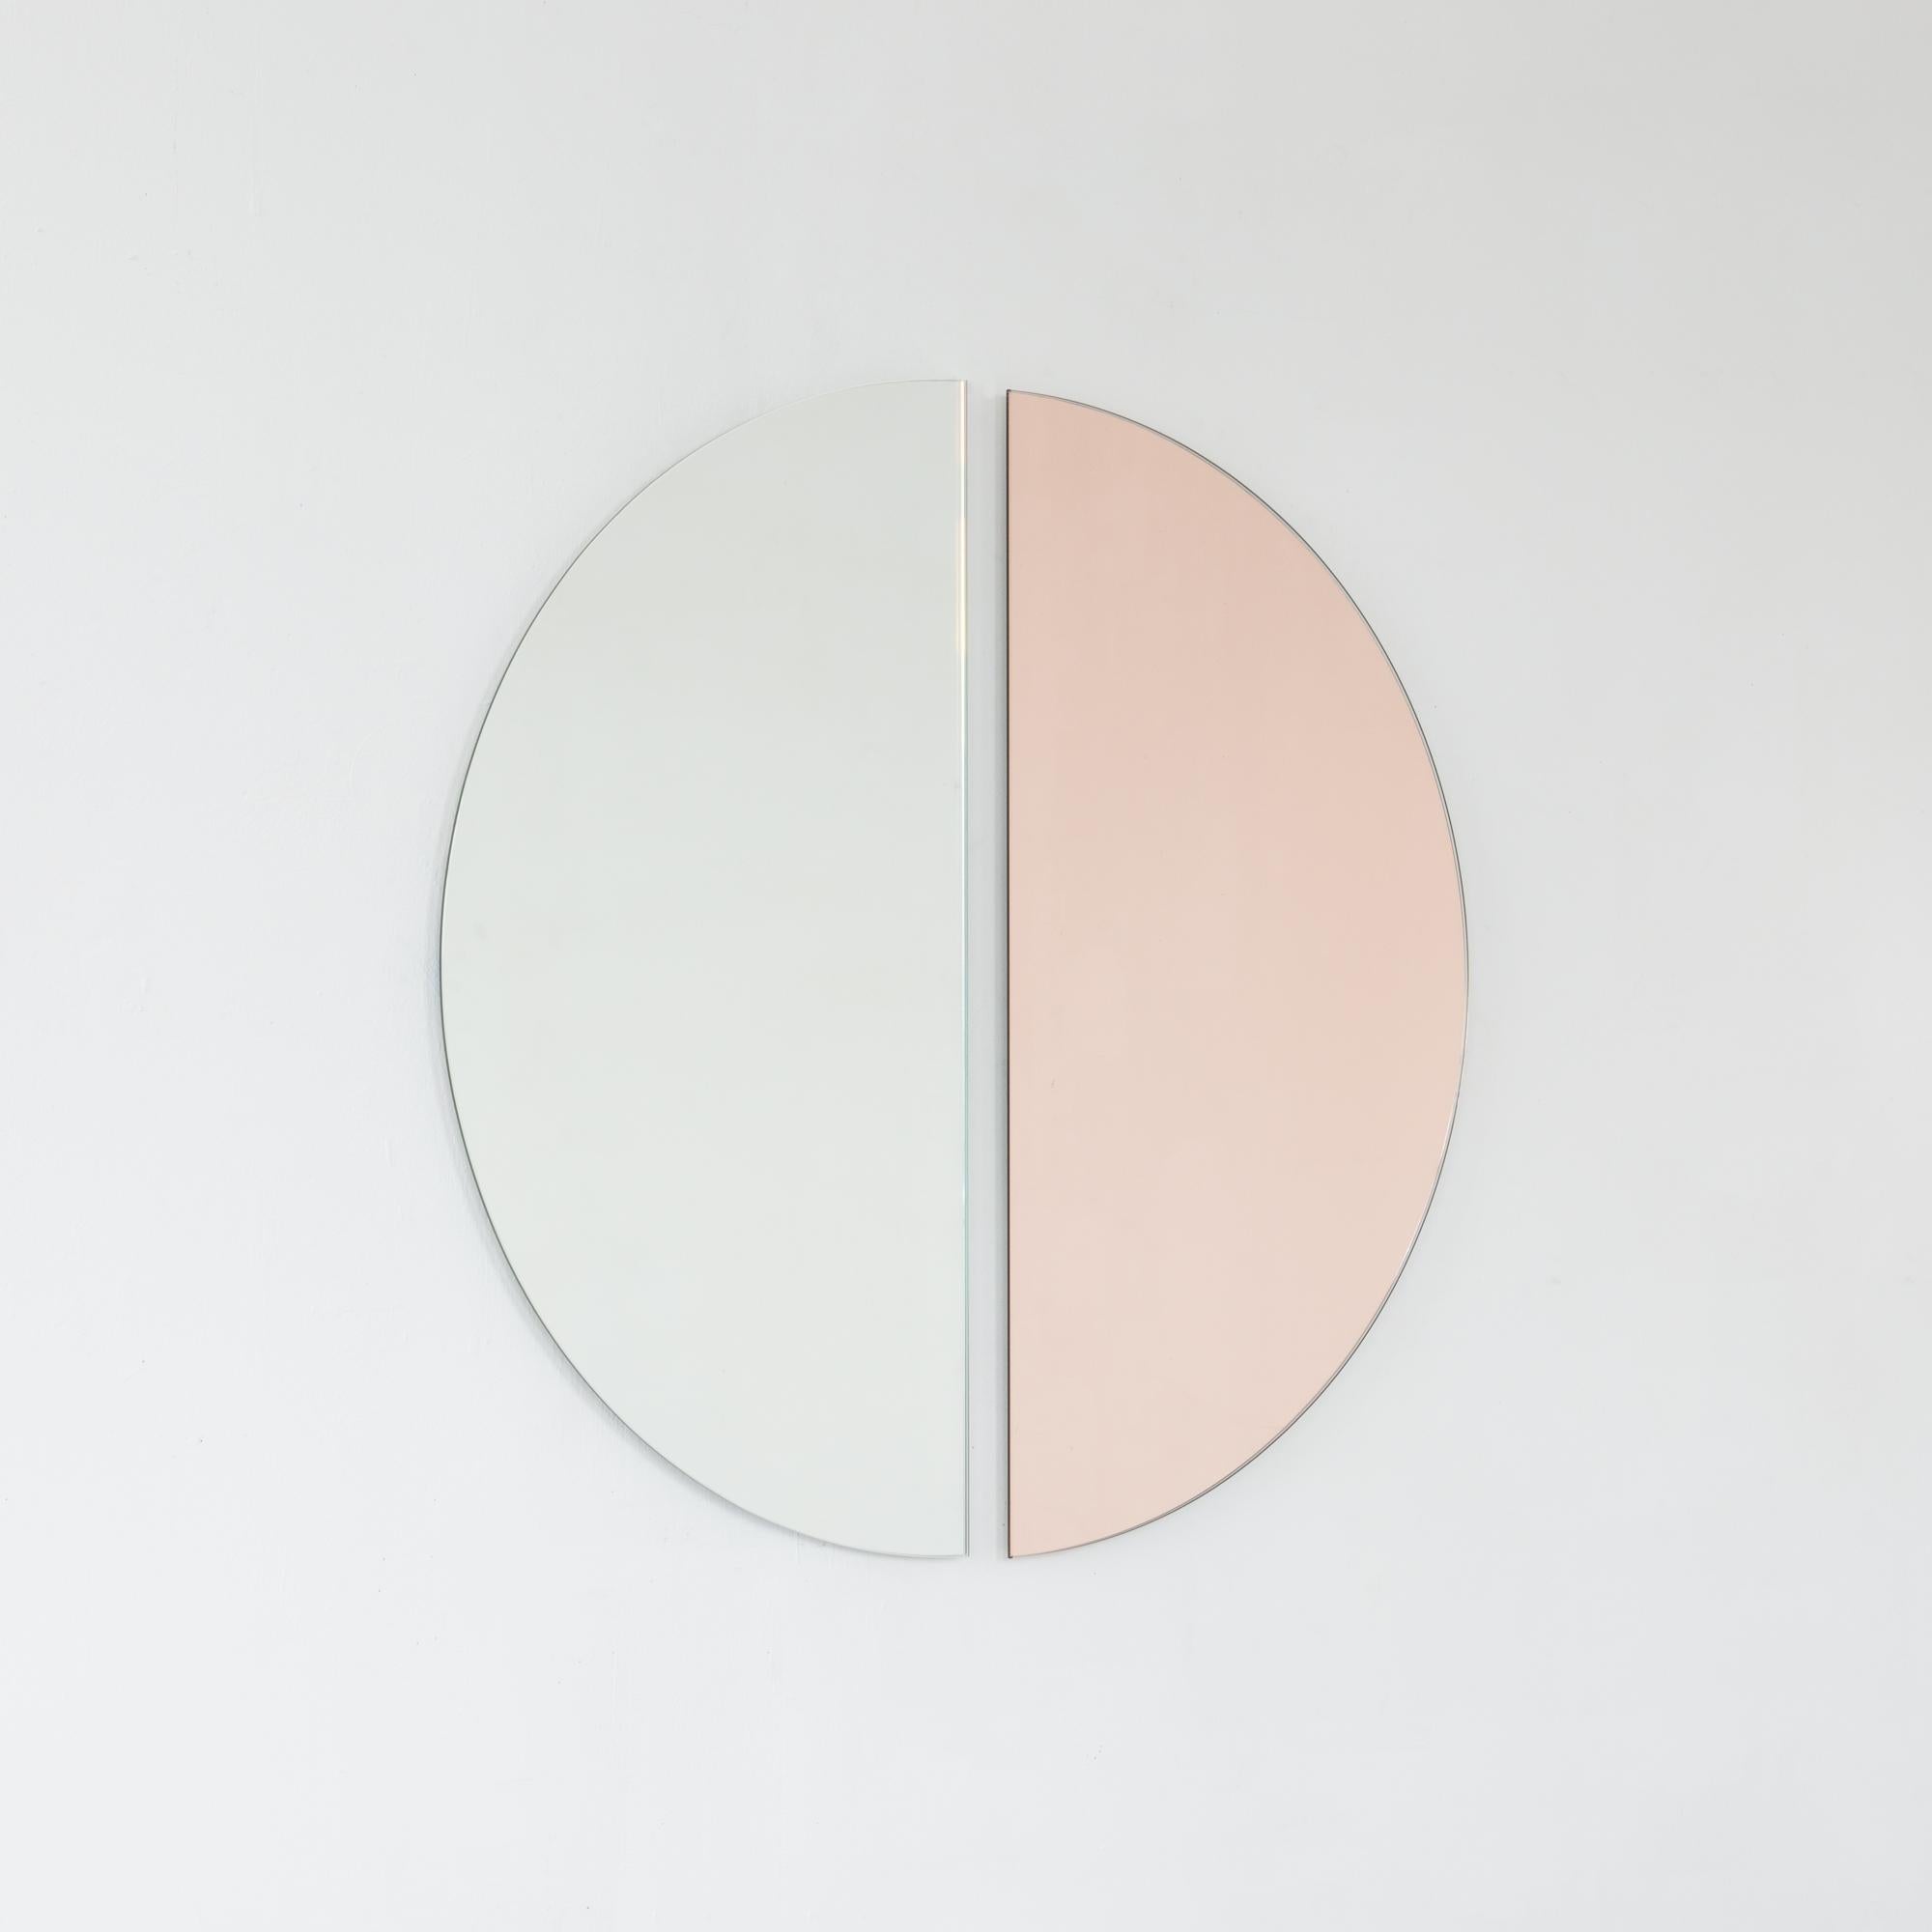 Set of two charming and minimalist rose gold (peach) and standard silver half-moon frameless mirrors with a floating effect. Fitted with a quality and ingenious hanging system for a flexible installation in 4 different directions. Designed and made